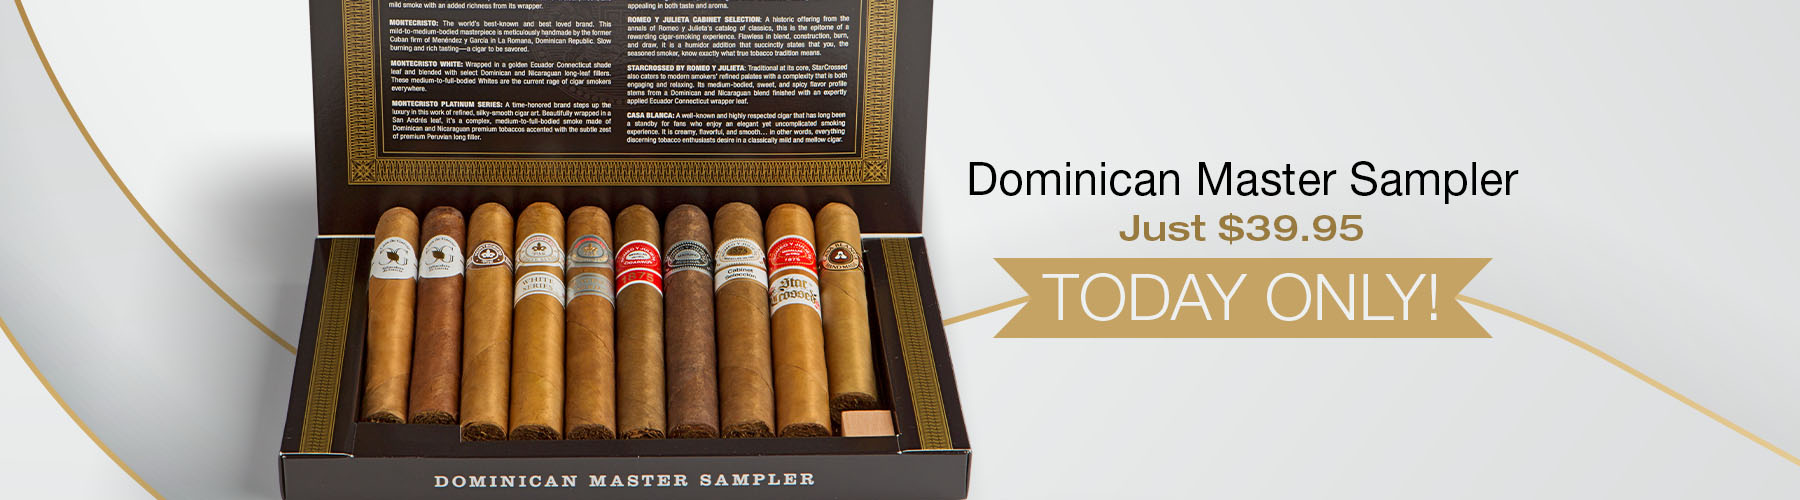 Dominican Master Sampler just $39.95 
Today Only!